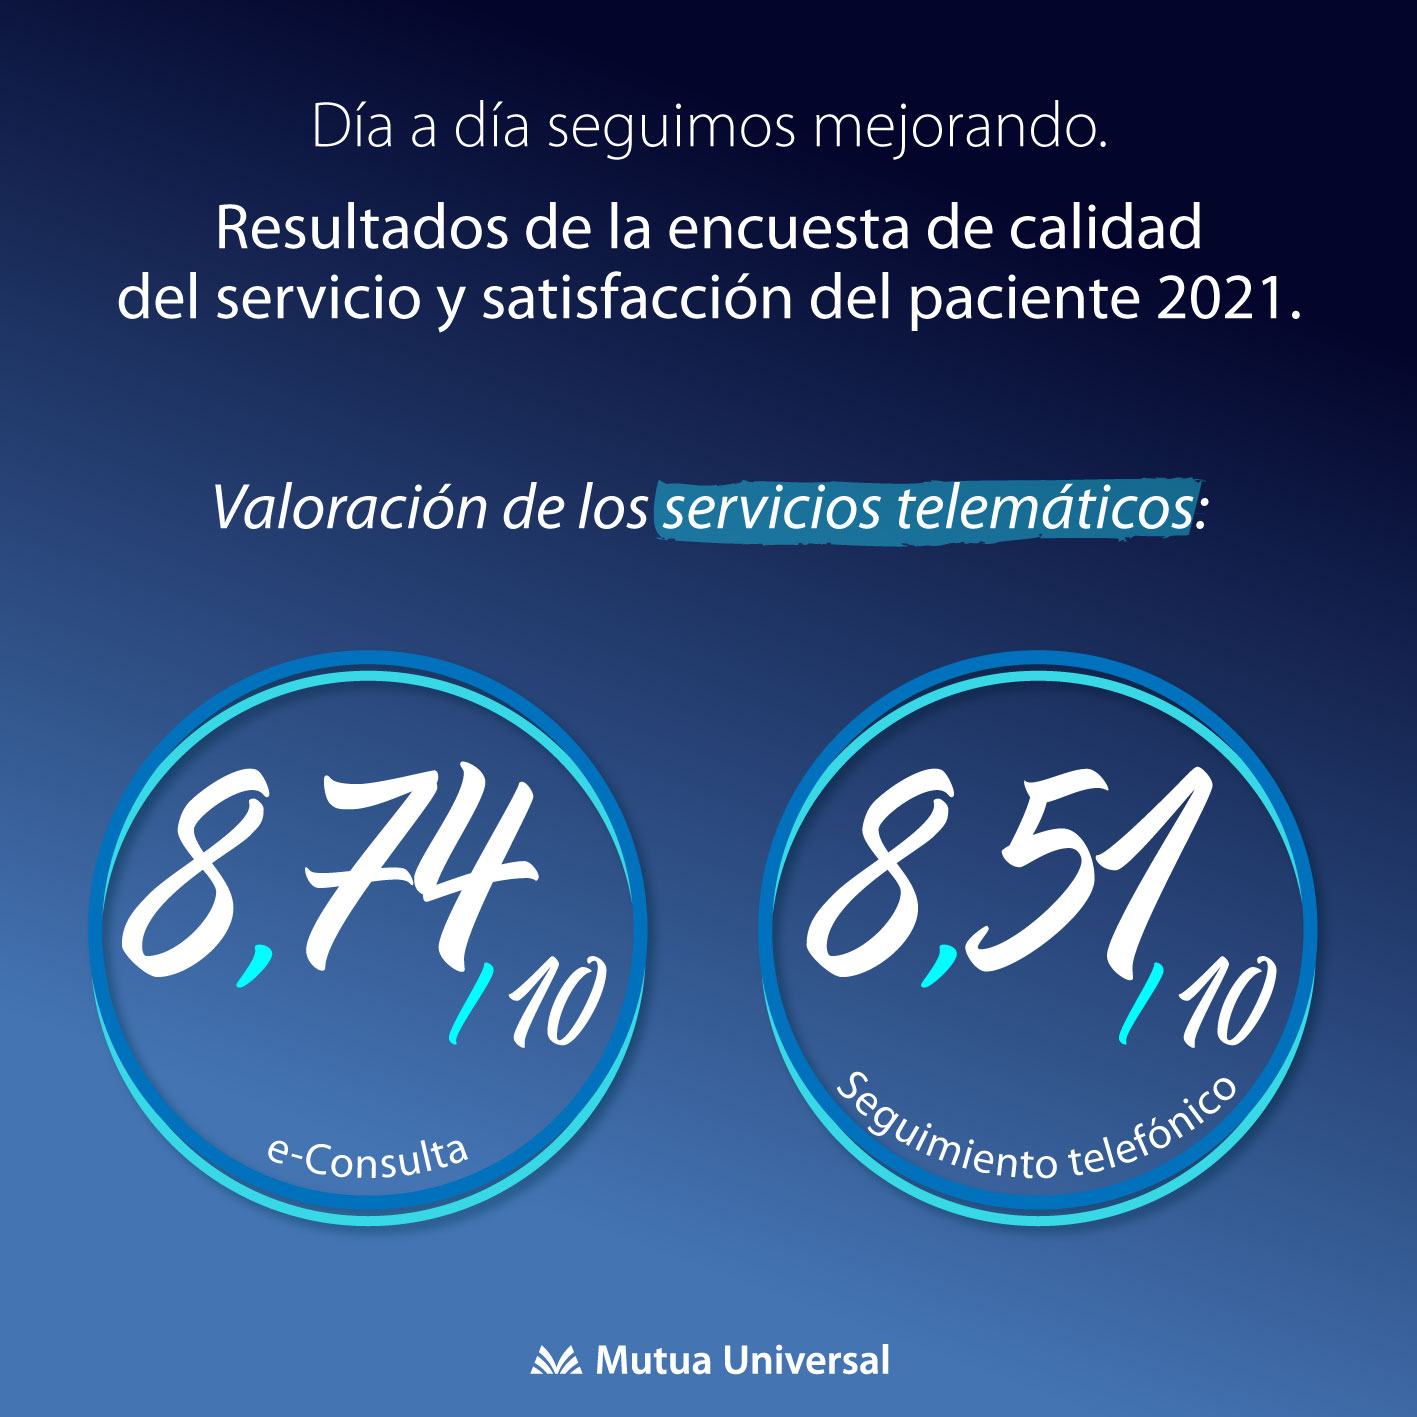 Assessment of the on-line services survey 2021